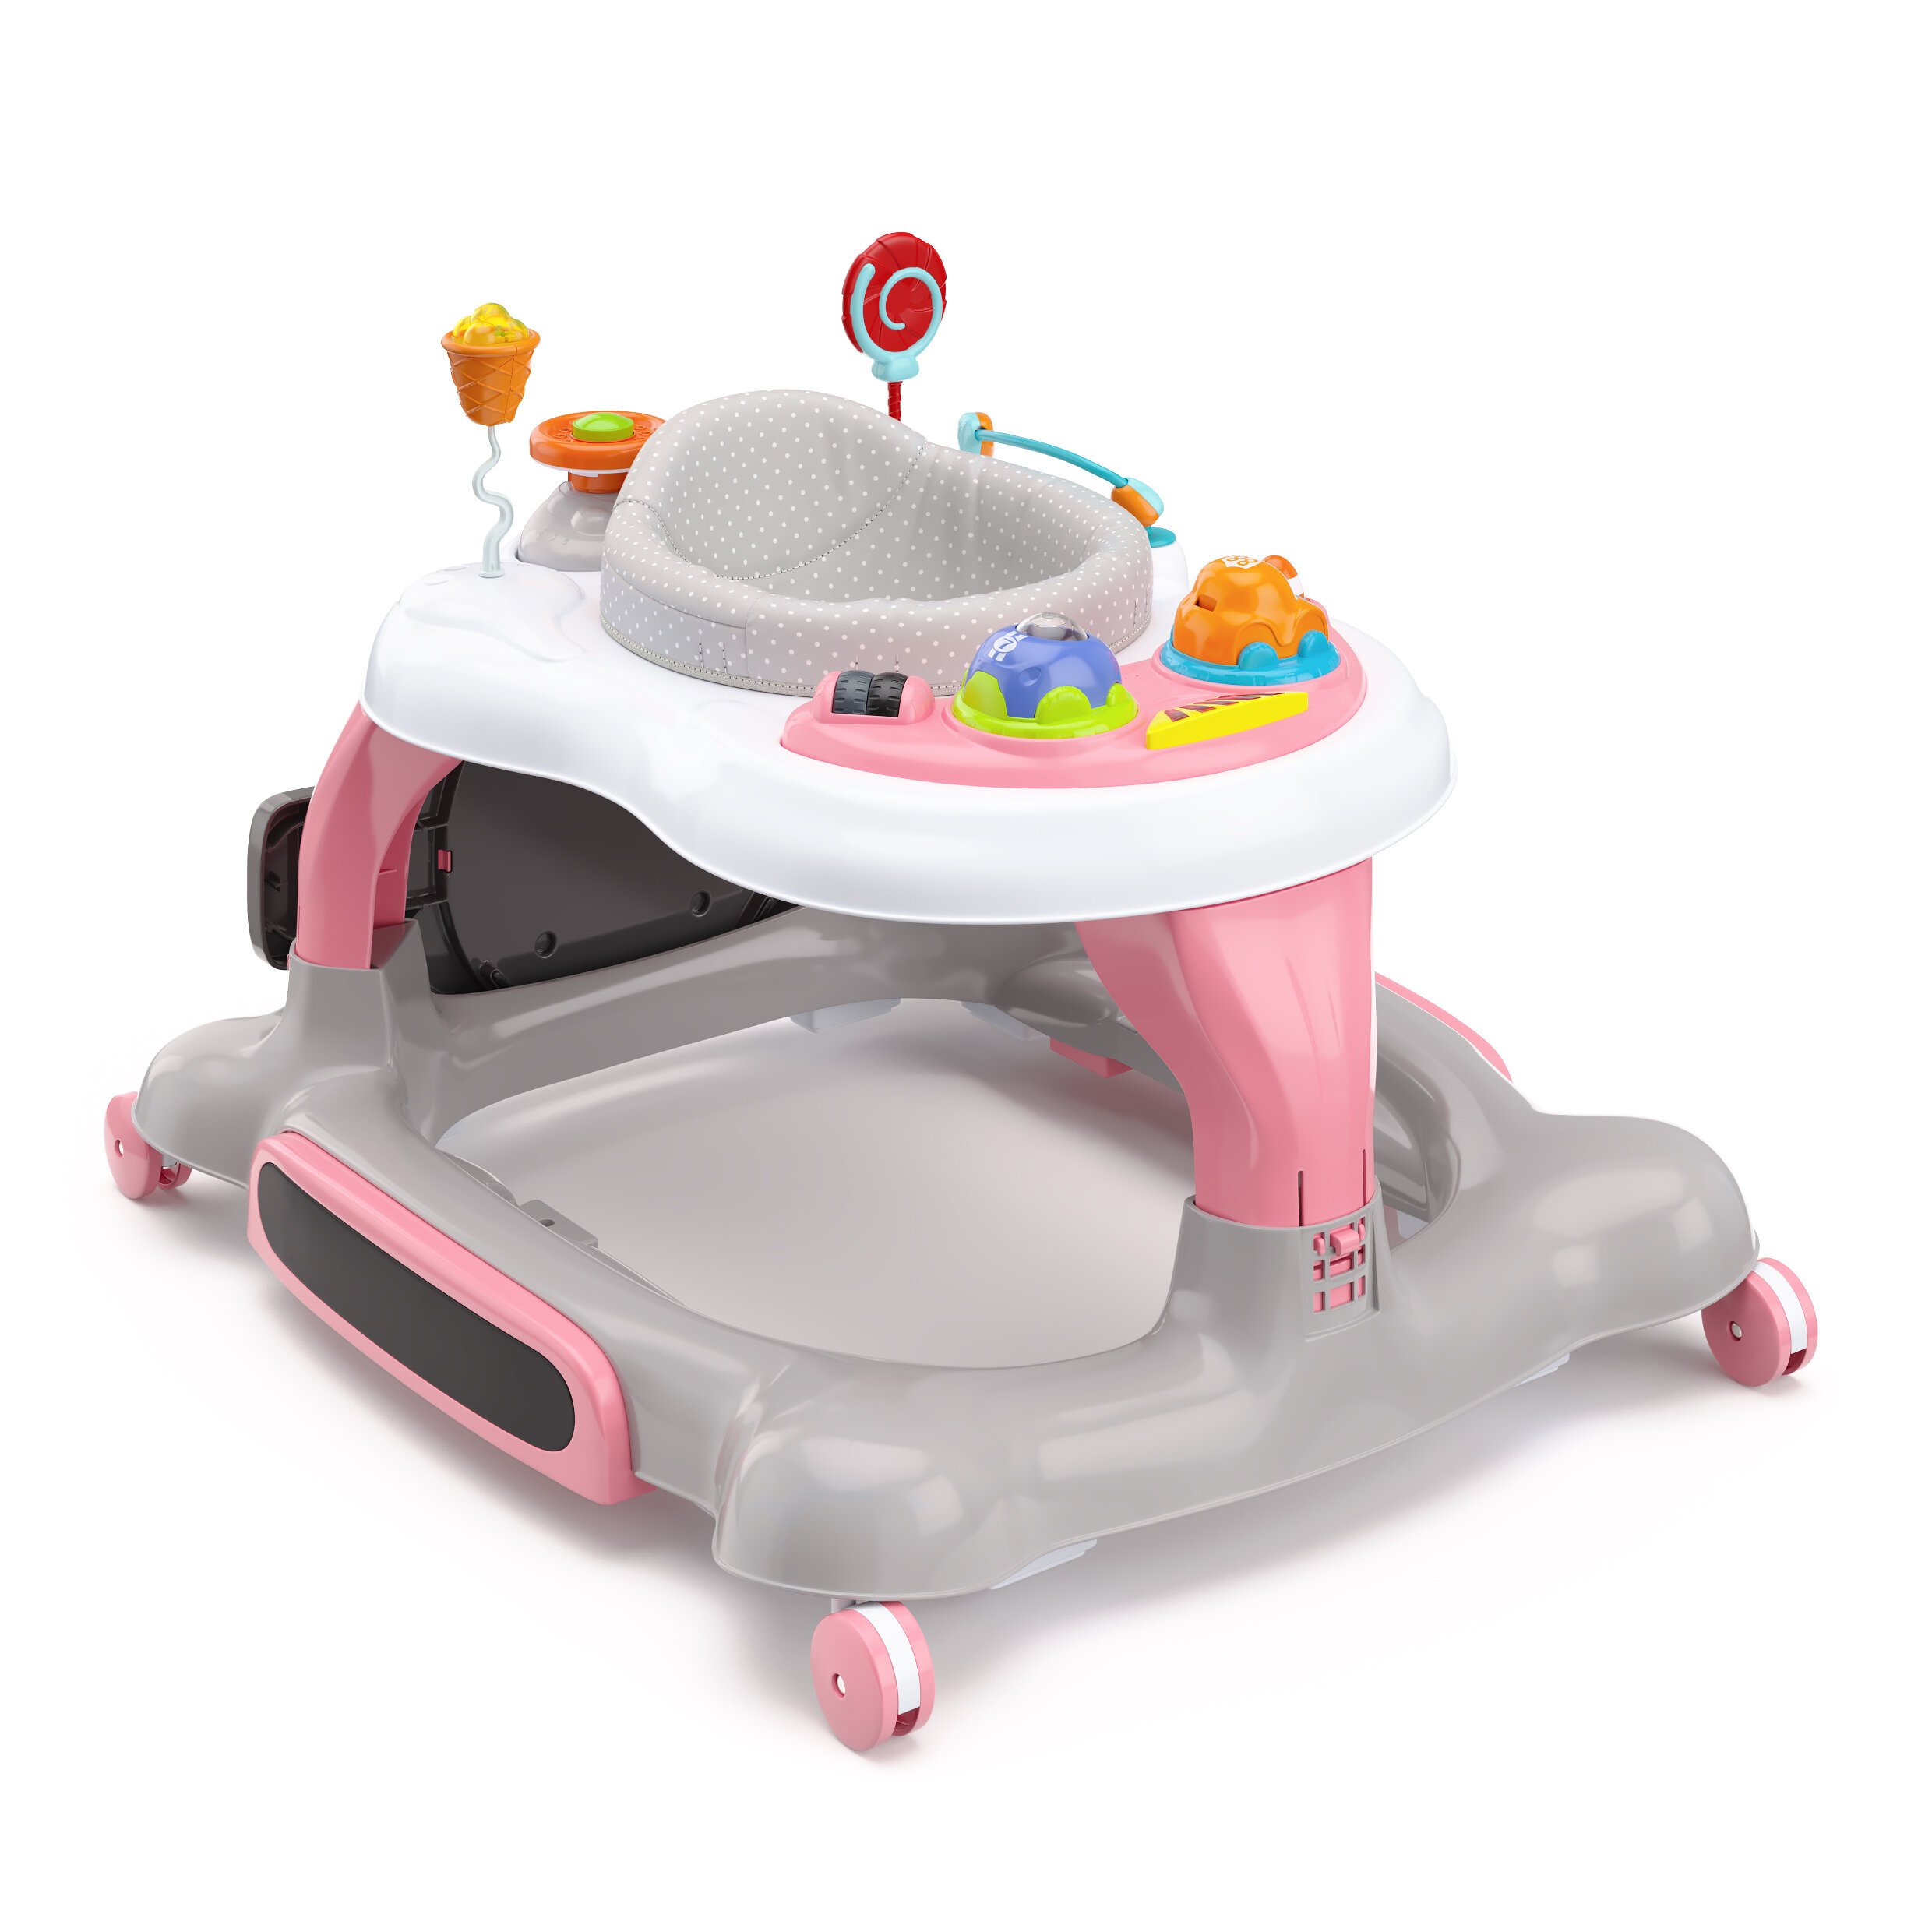 New My Child 2 in 1 car walker and rocker Red from 6 months with Lights & sounds 